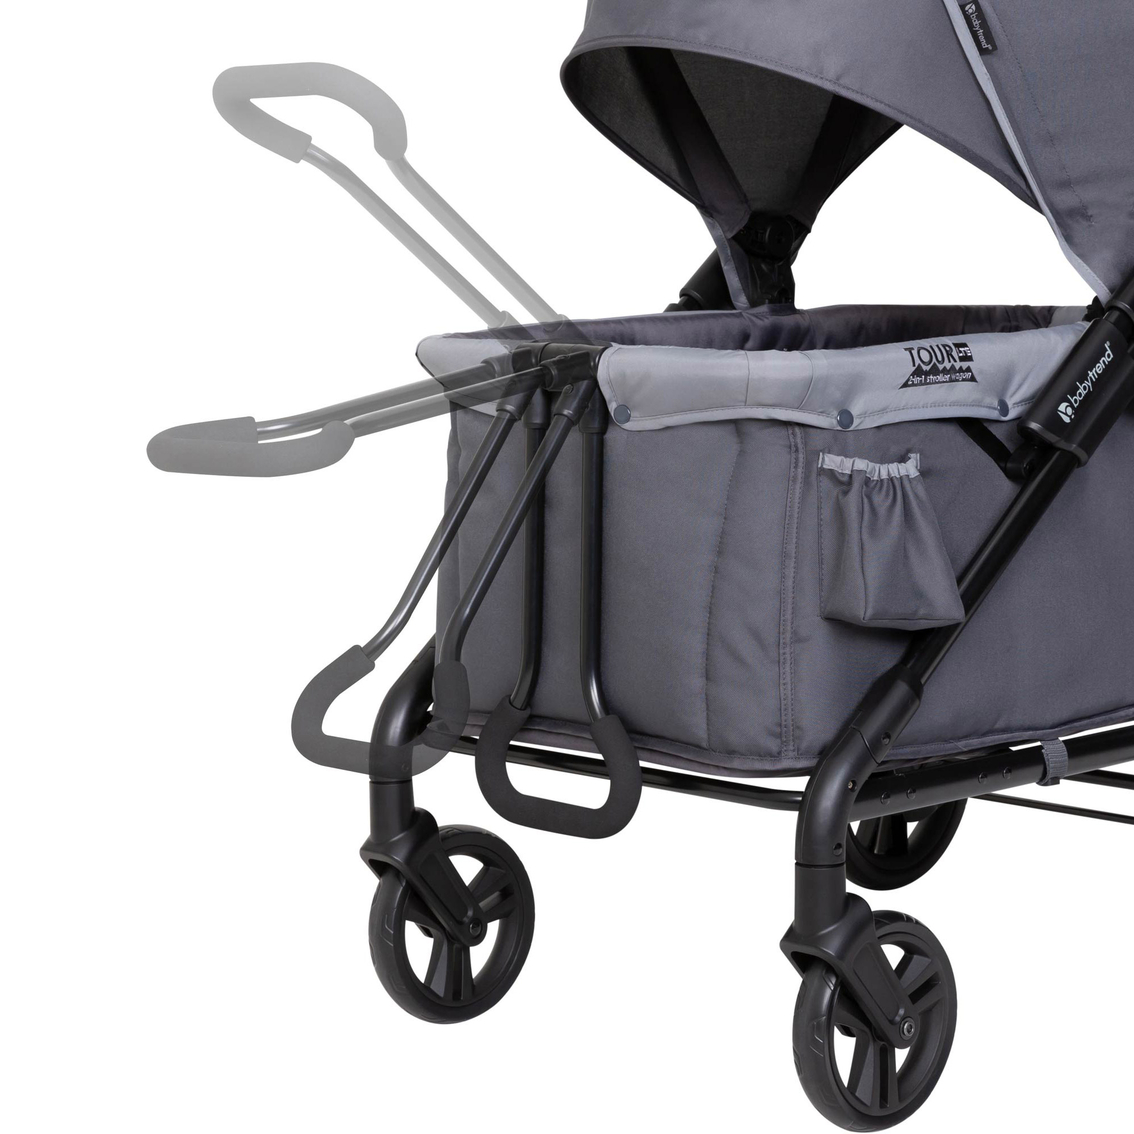 Baby Trend Tour LTE 2-in-1 Stroller Wagon - Image 2 of 10